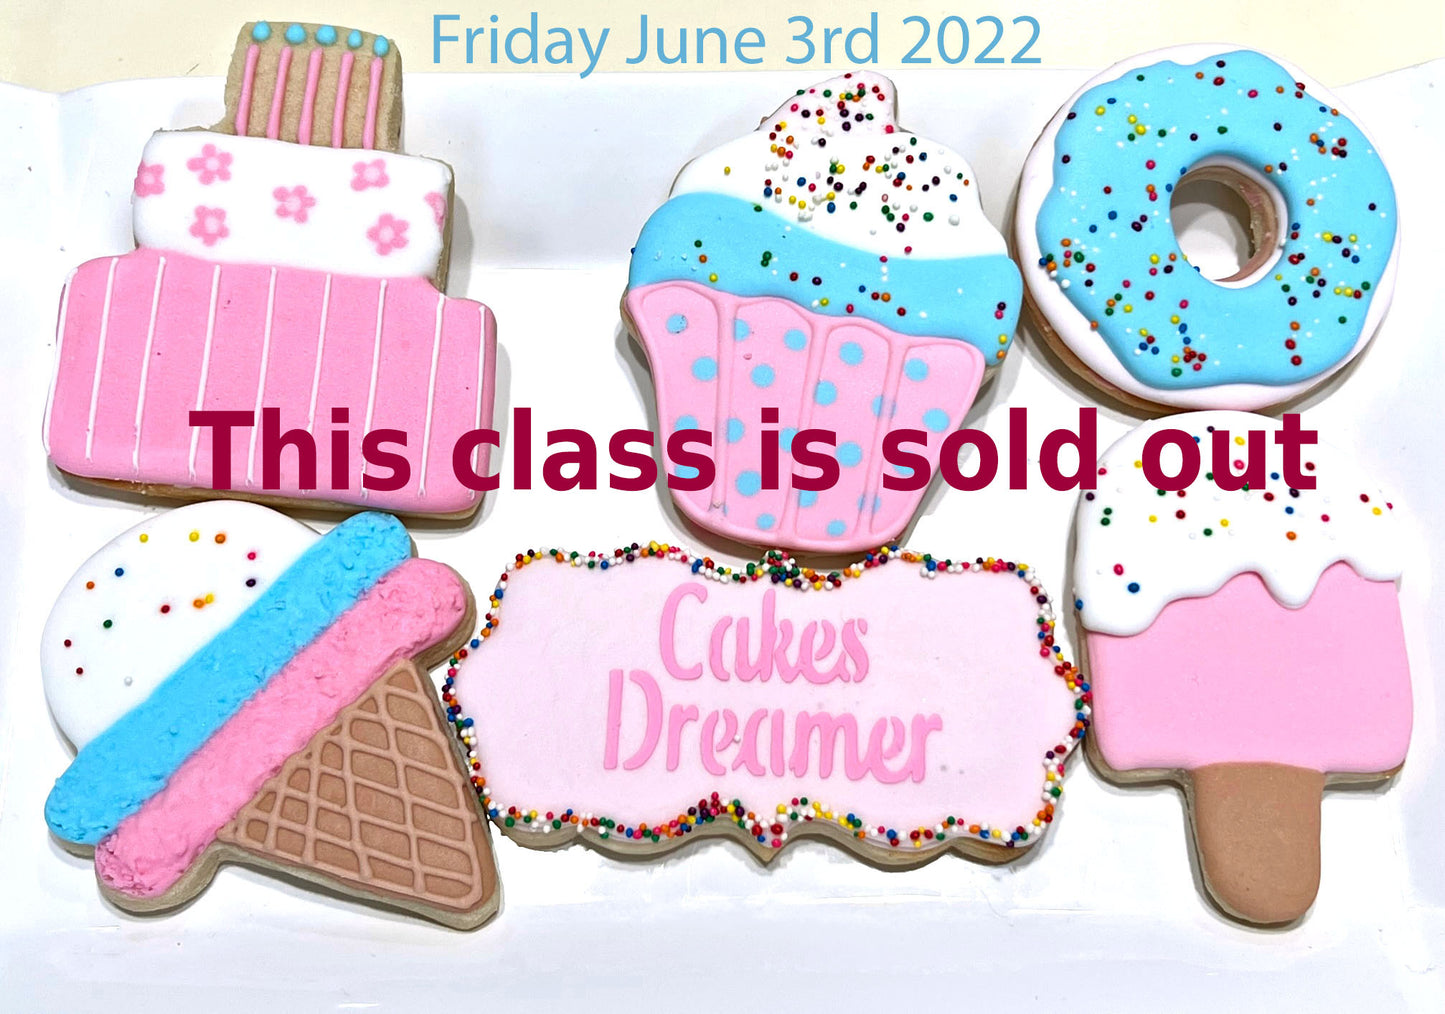 Friday 6/3/2022: Sugar Cookie Decorating class - Birthday Party Theme